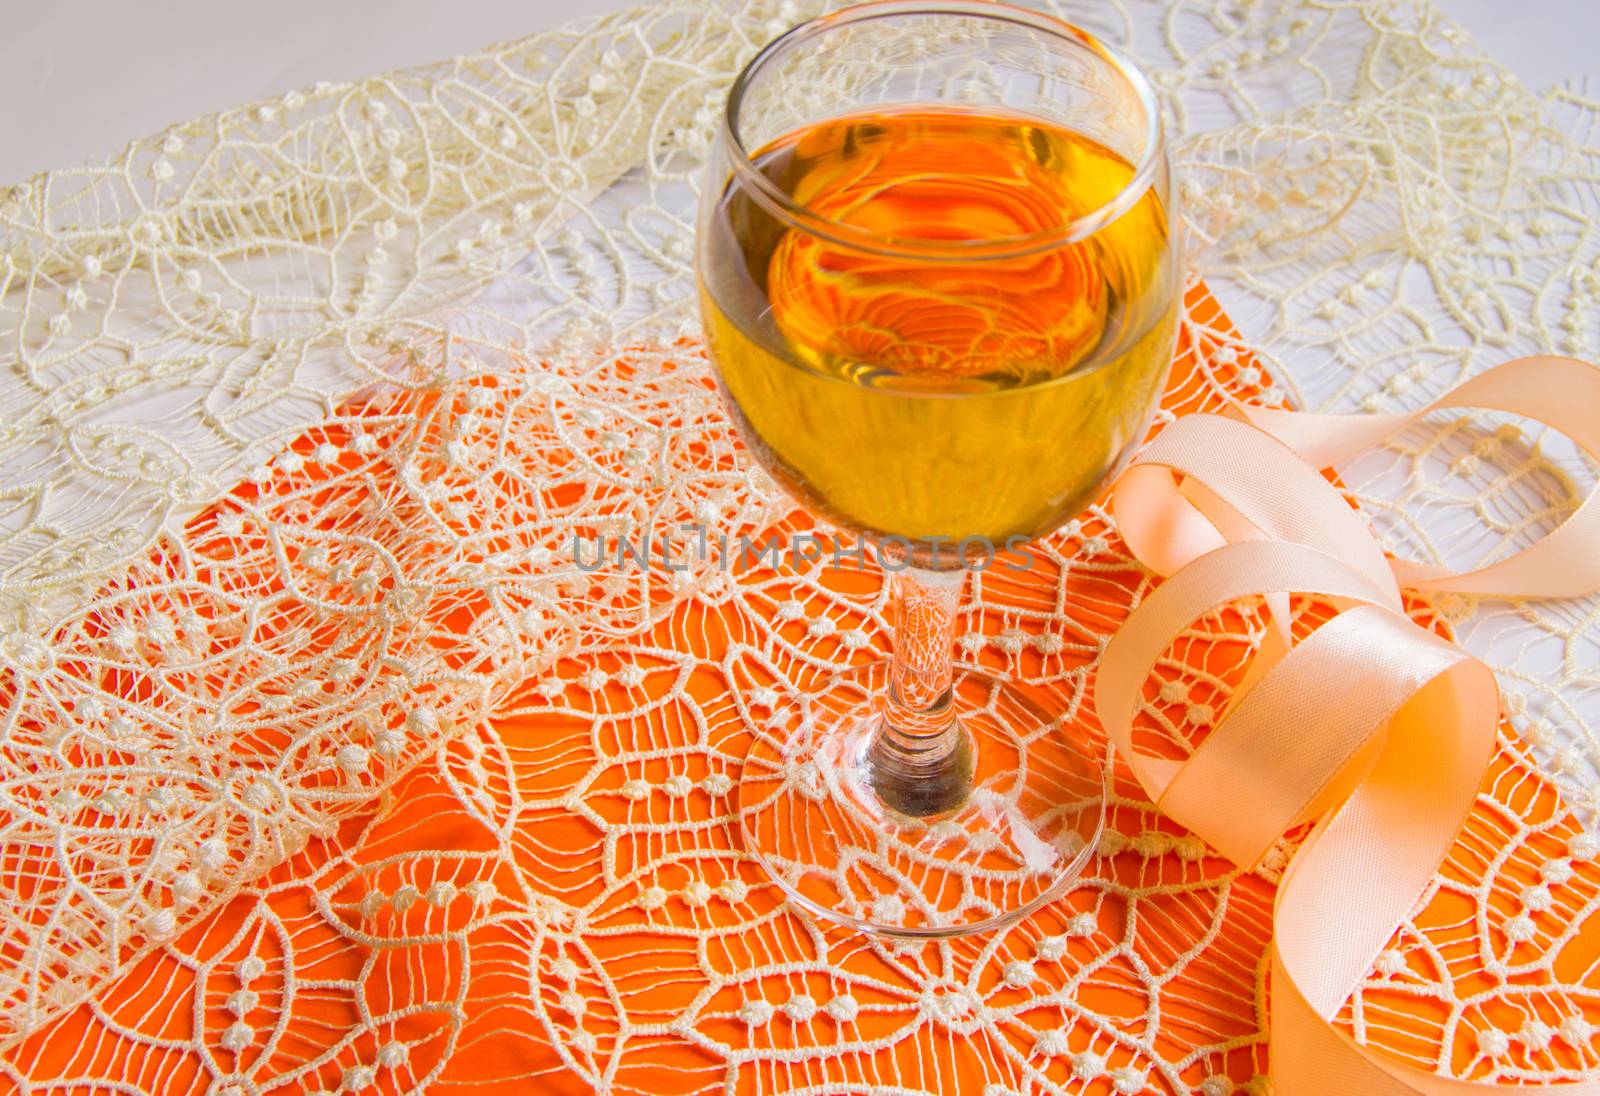 Flat stacking of white wine in a glass, beige lace and decorative ribbon, orange background, top view. Romantic spring or summer composition by claire_lucia